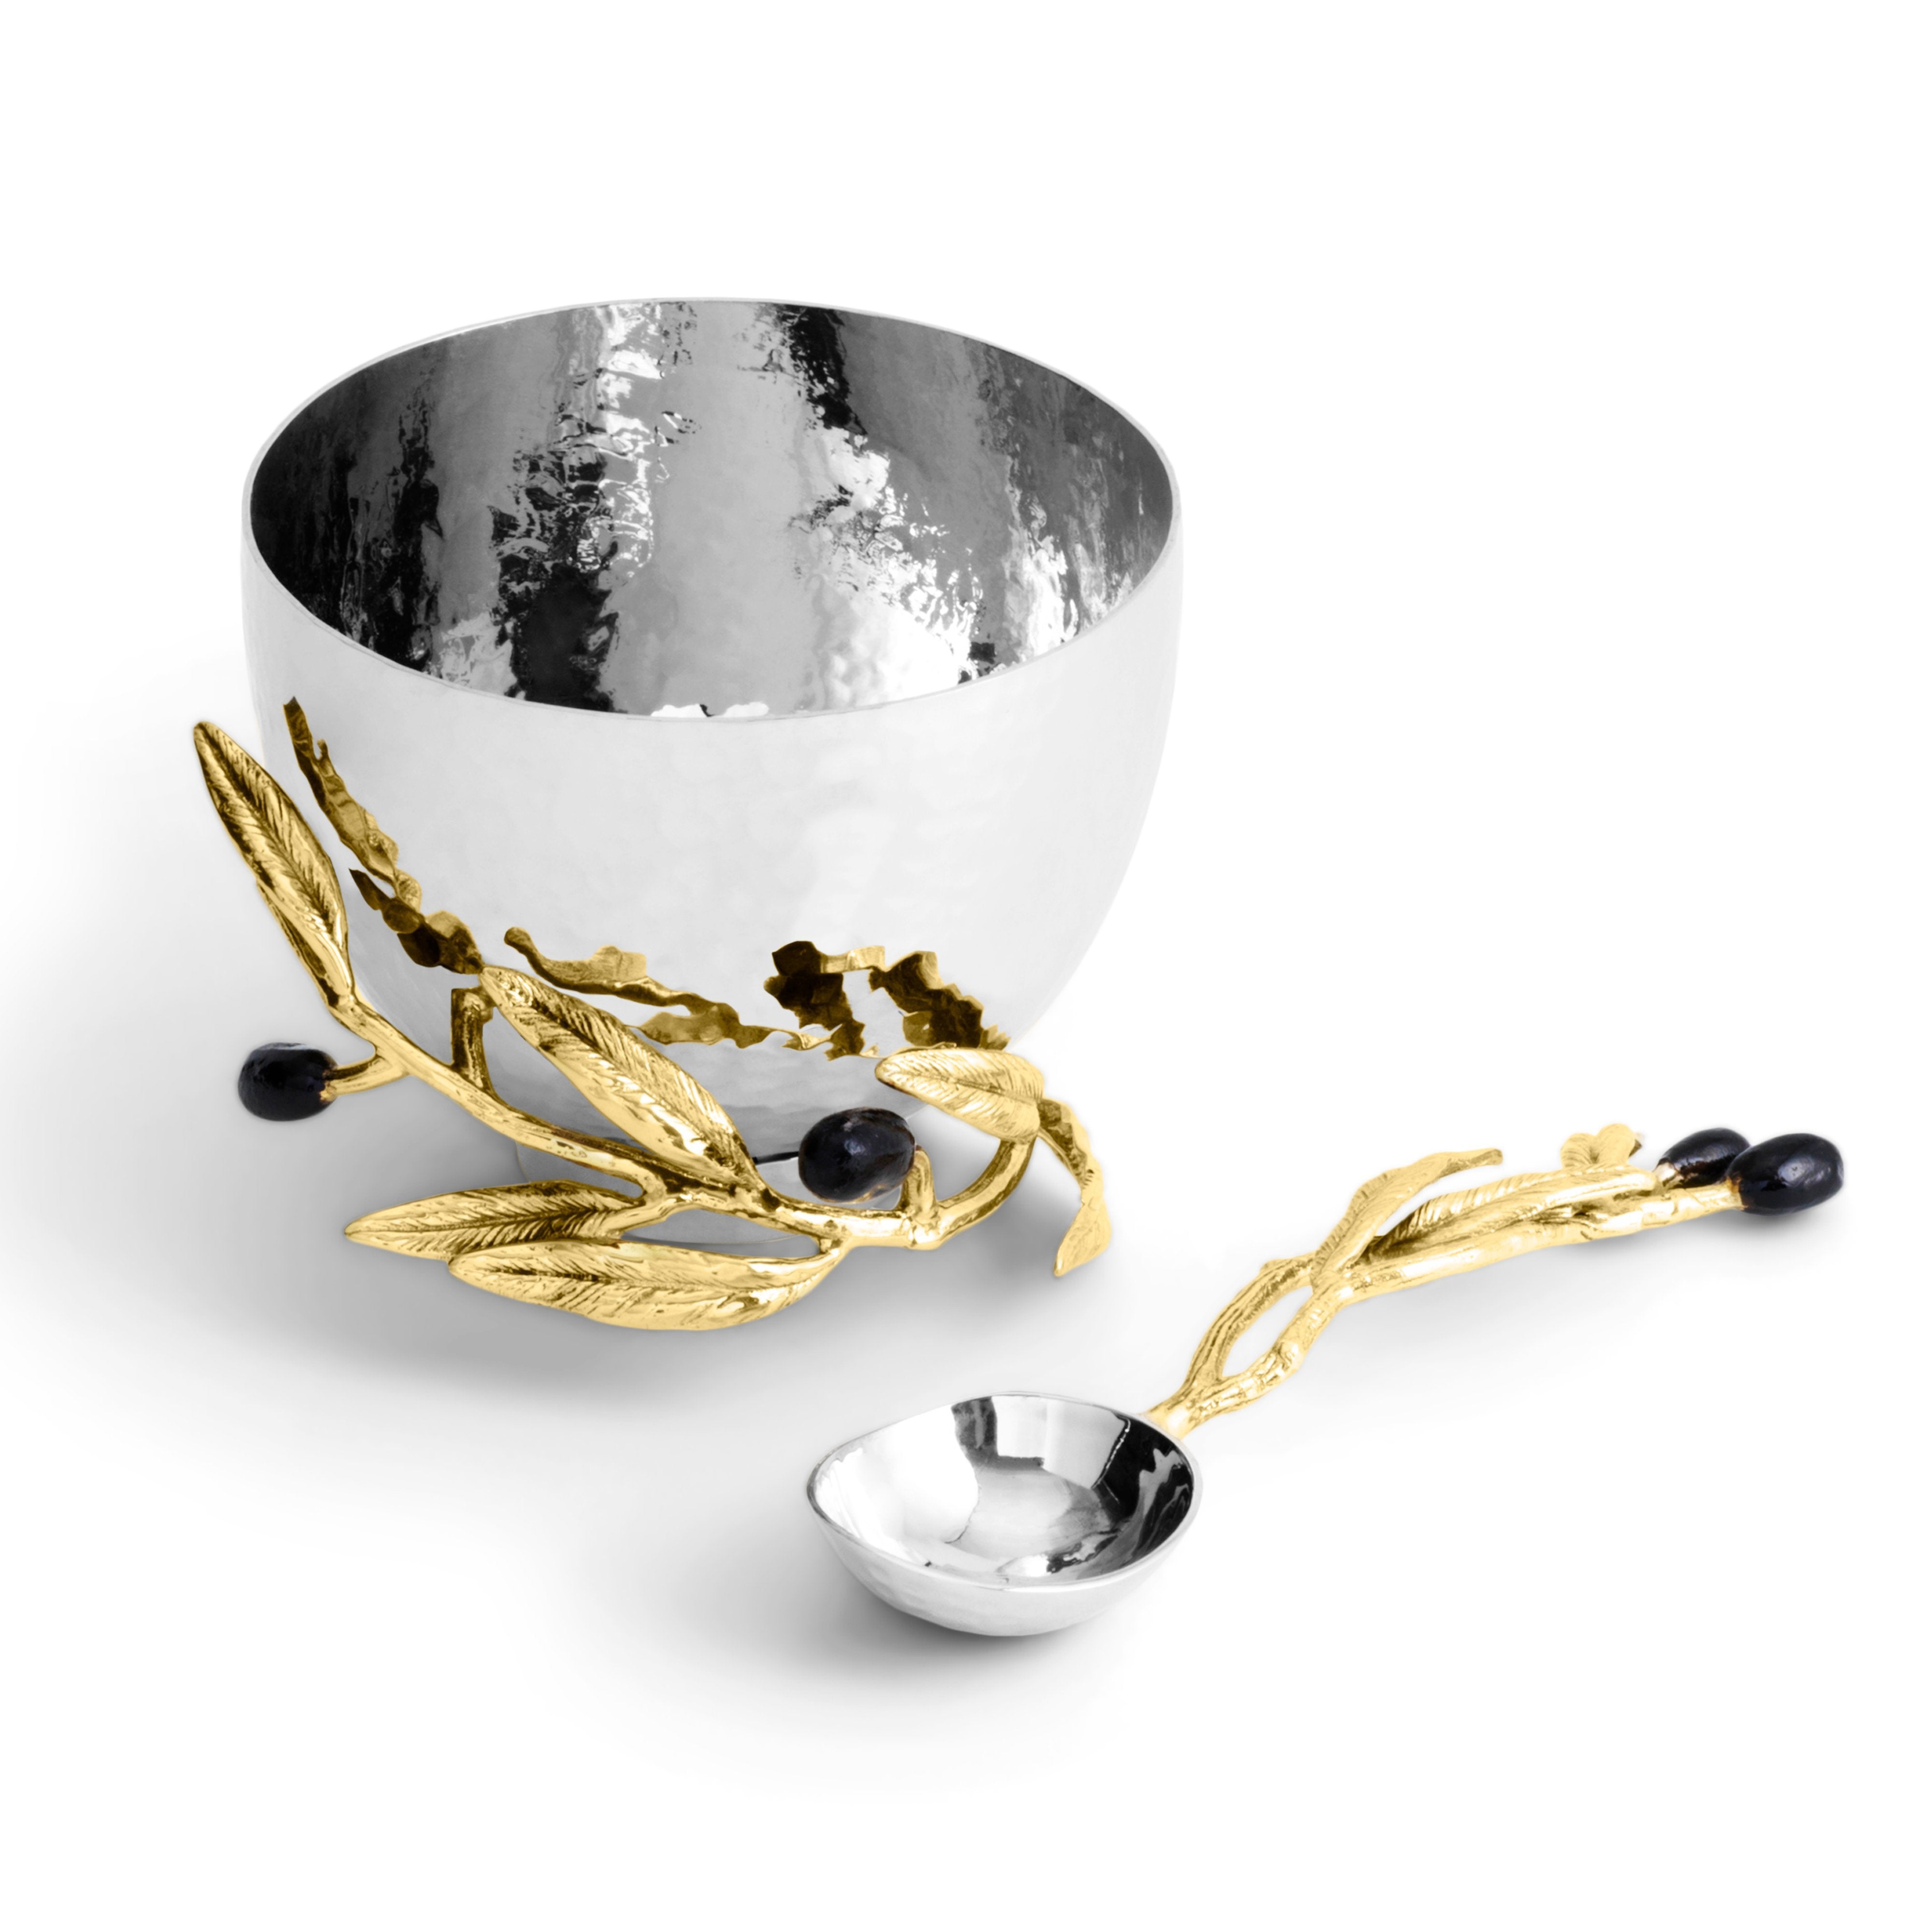 Michael Aram Olive Branch Nut Dish with Spoon